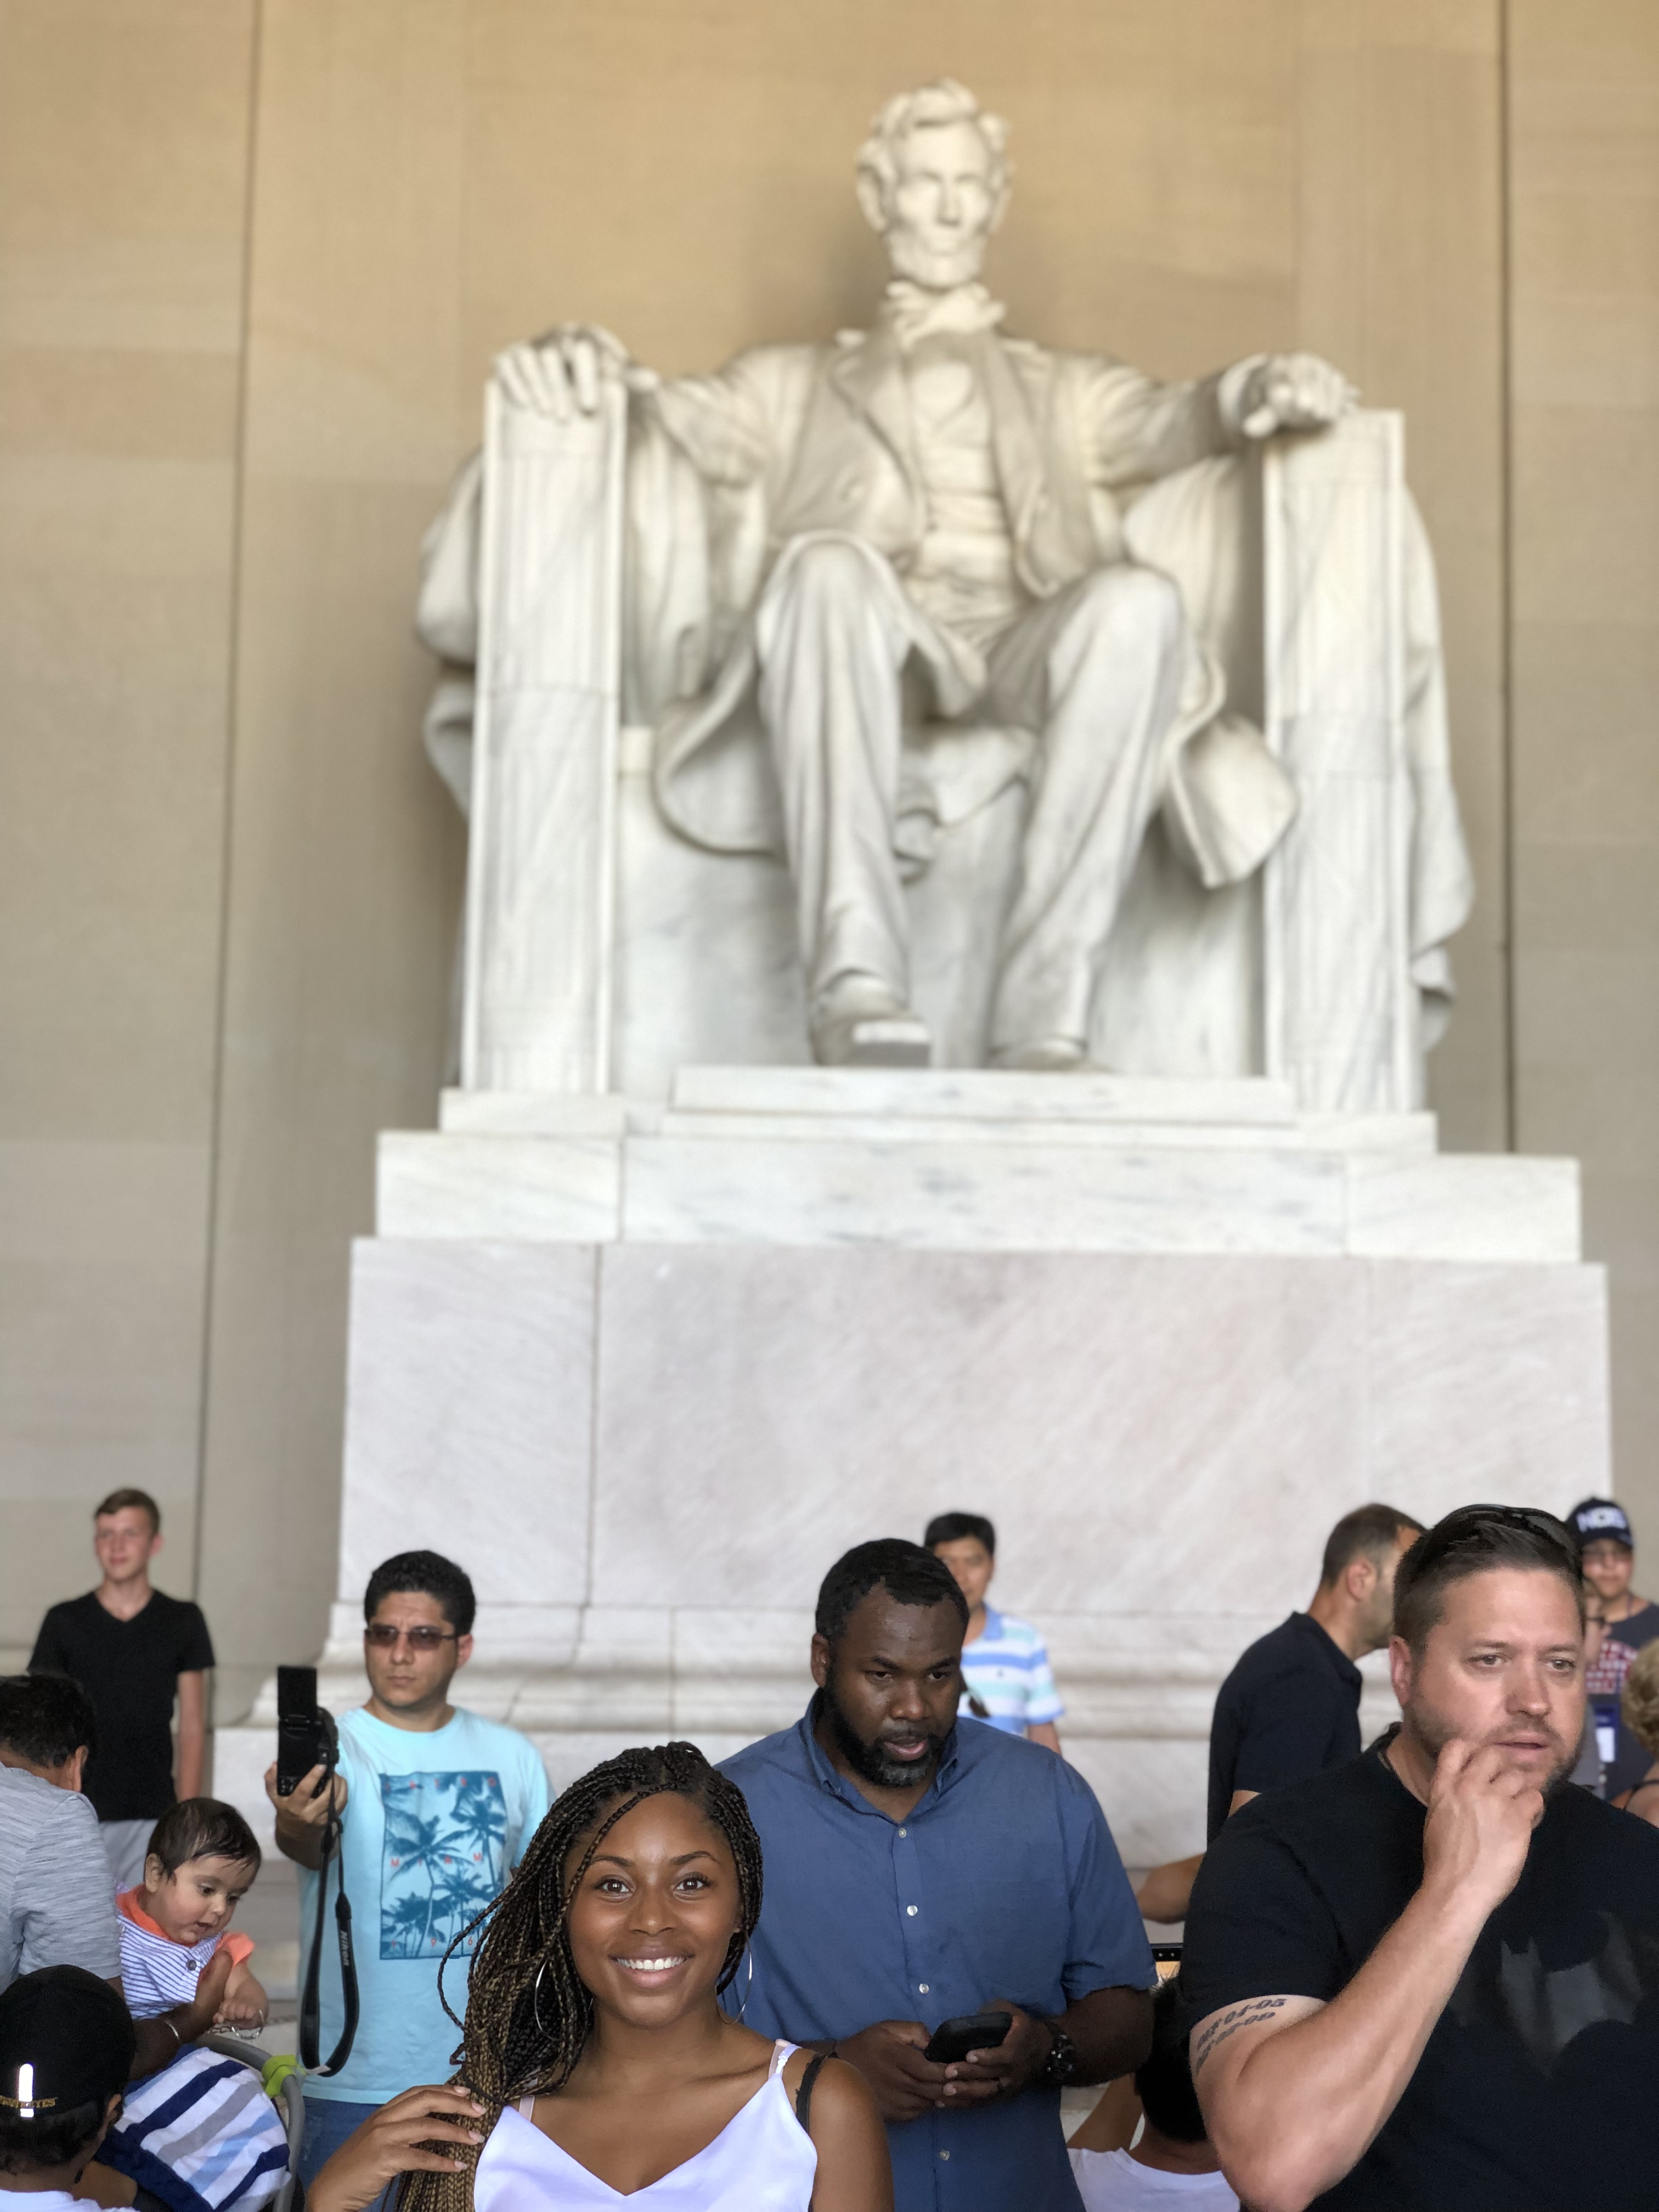 We walked the Washington Mall and saw the Lincoln Memorial. I read Lincoln’s inauguration and Martin Luther King’s “I Have a Dream” speech to myself while there (nerd things).